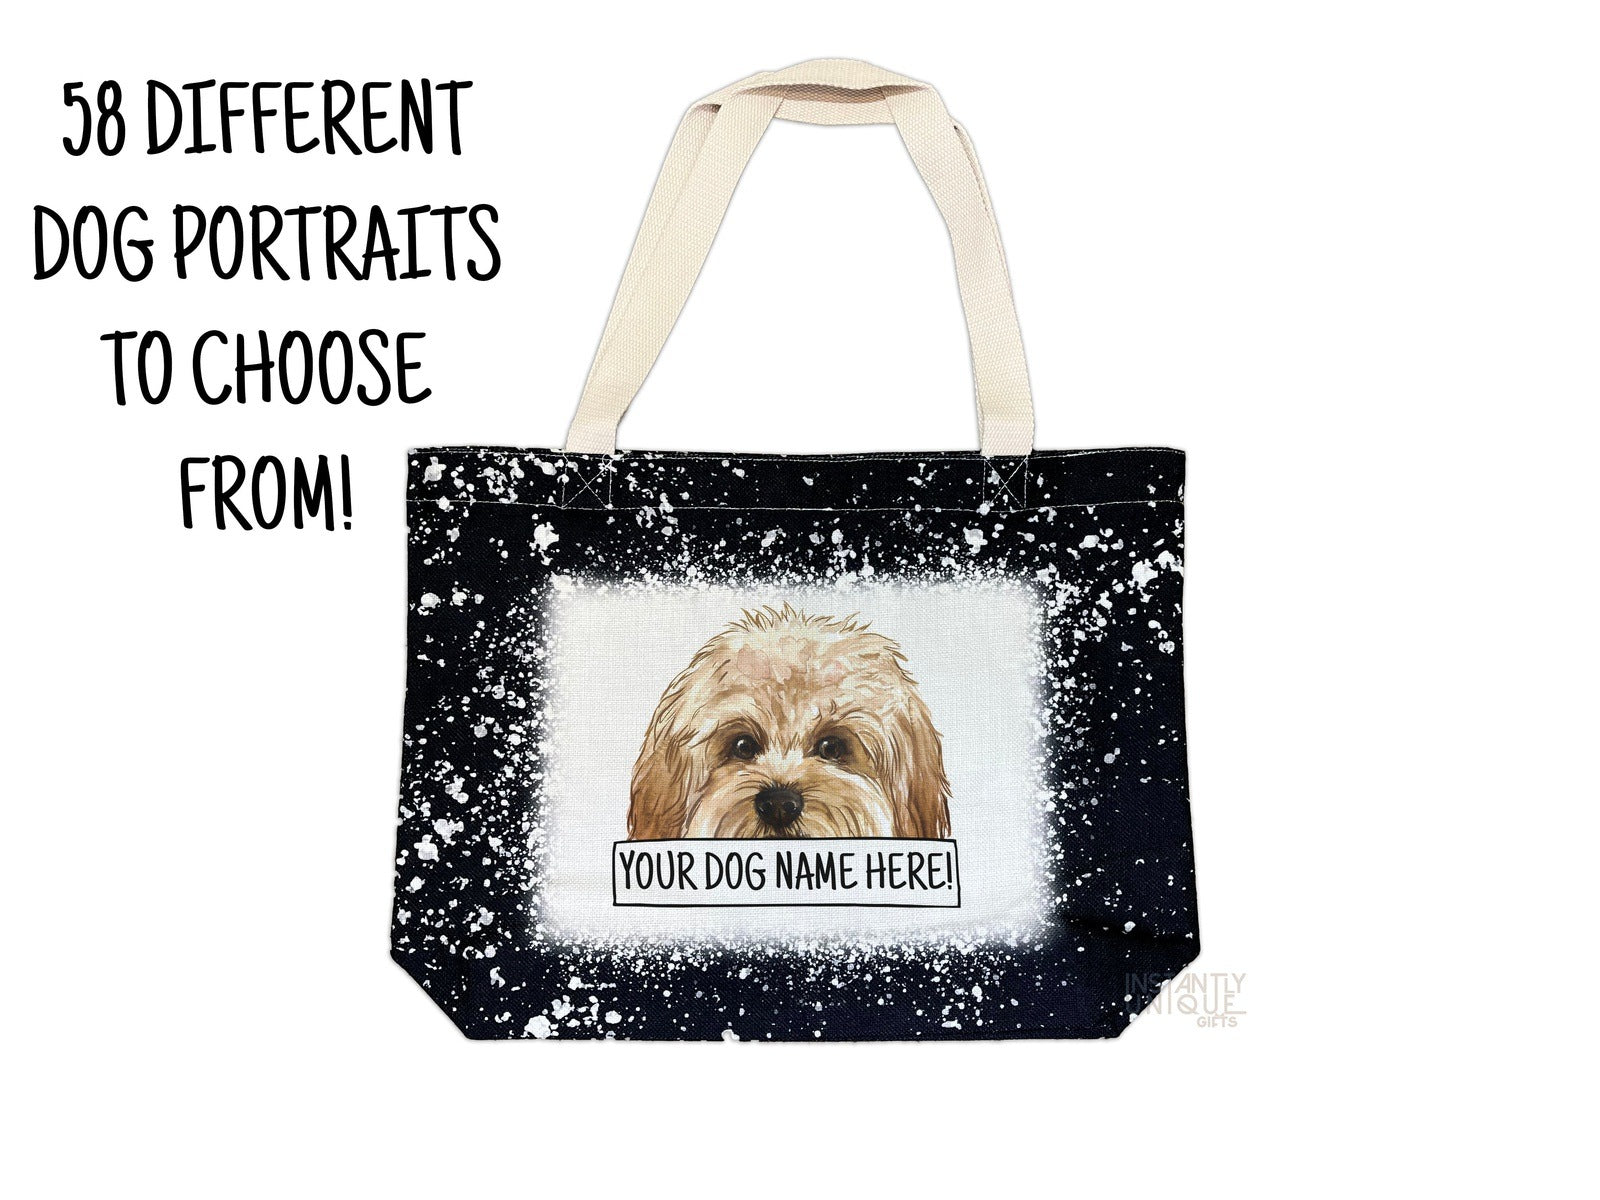 Add Your Dog Portrait and Name Custom Tote - Black Bleach Design